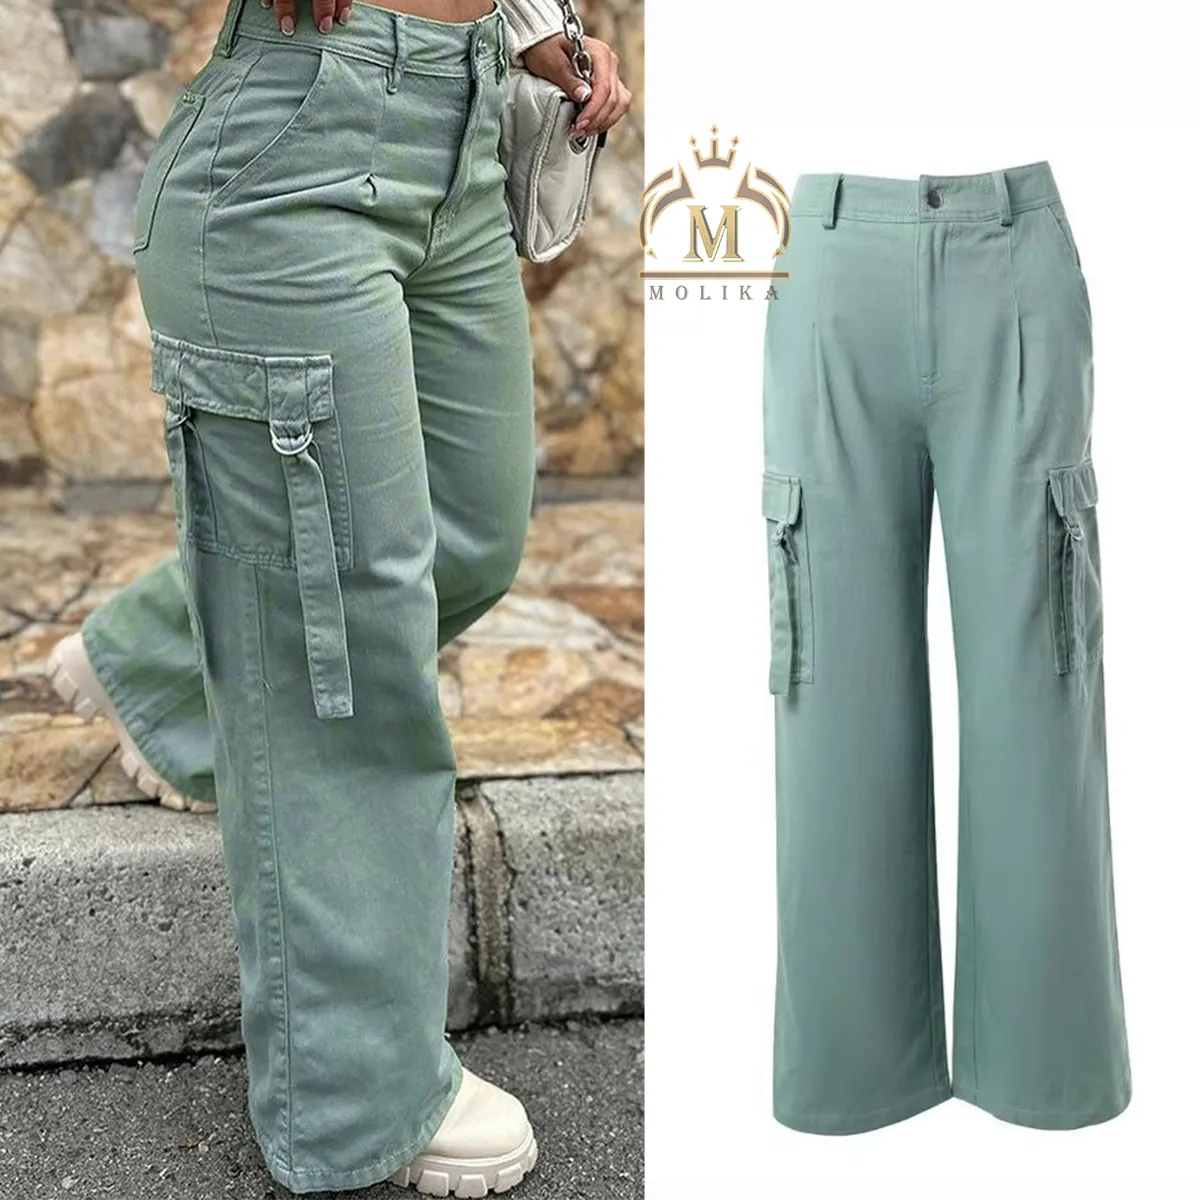 New Arrivals Cool Girl's Wear Women Cotton High Waist Workout Cargo Pants With Pockets Straight Overall Cargo Pants For Women